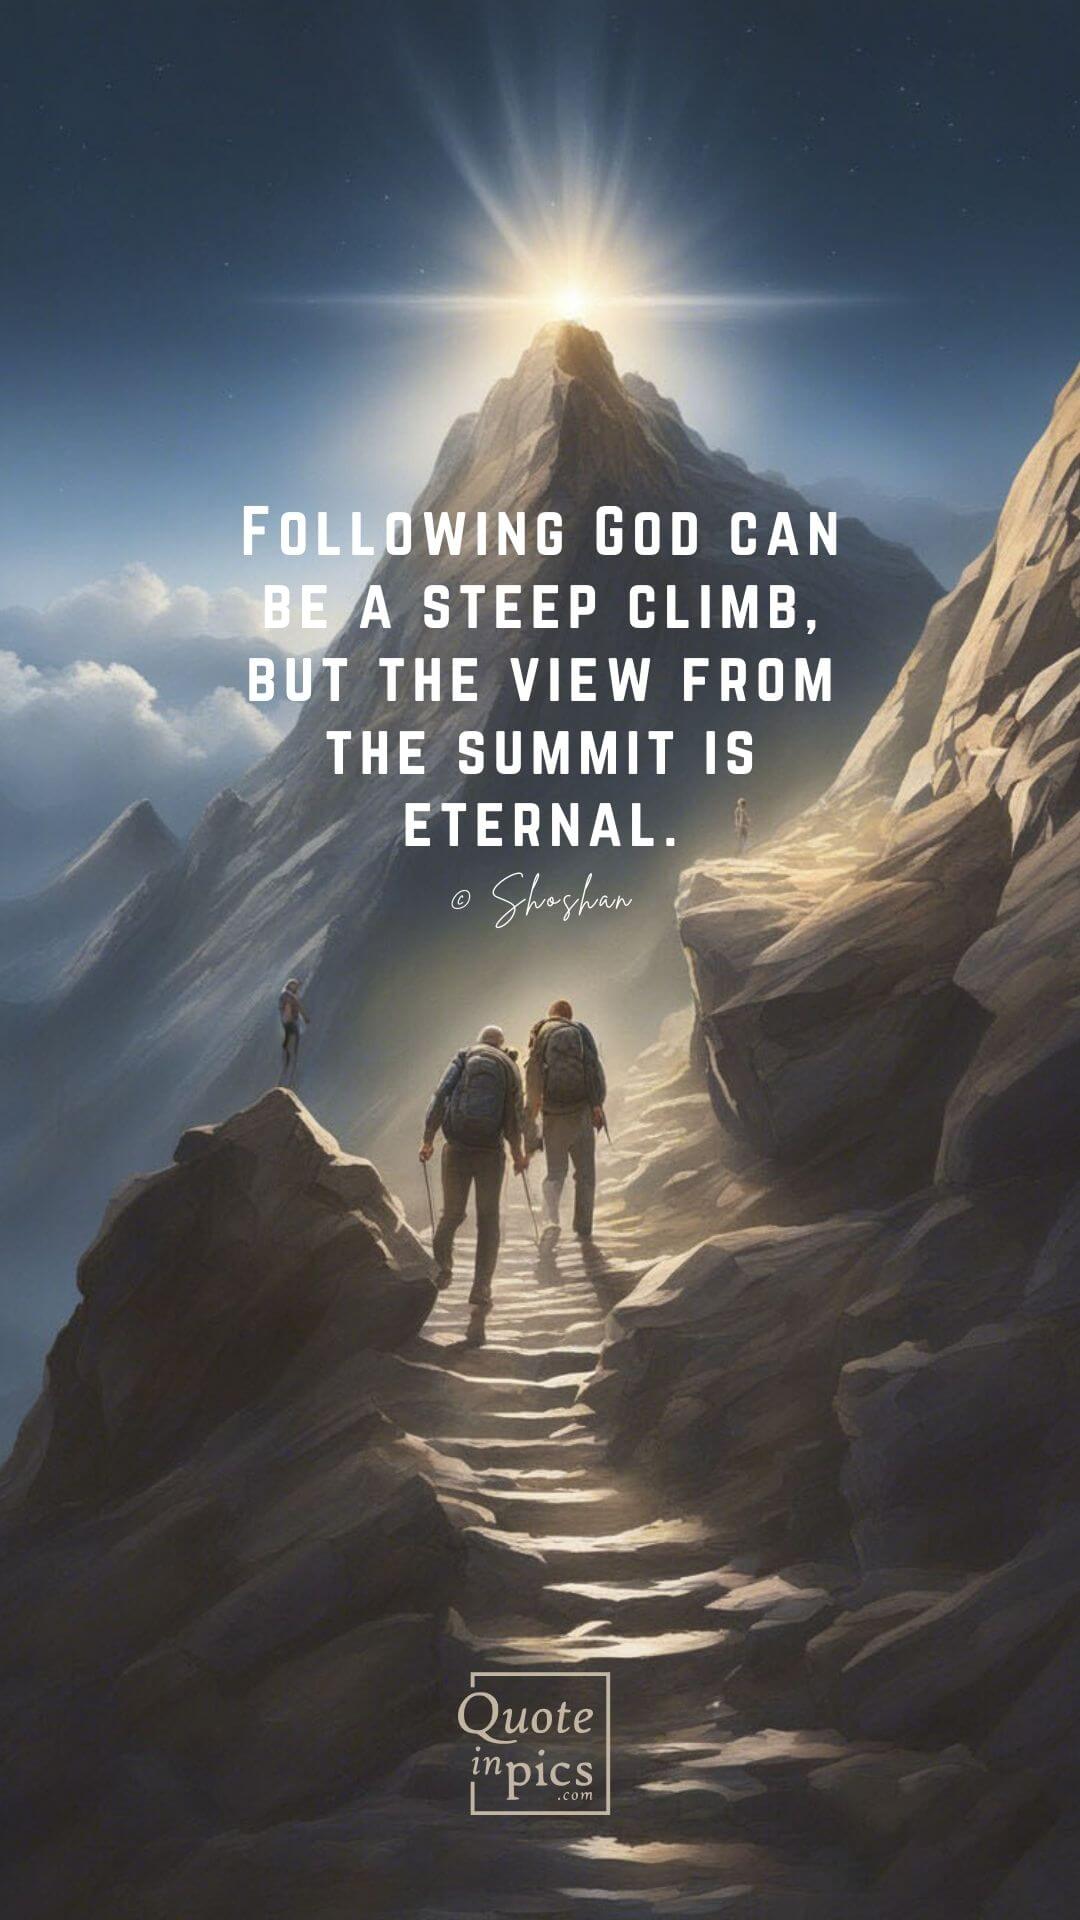 Following God can be a steep climb, but the view from the summit is eternal.